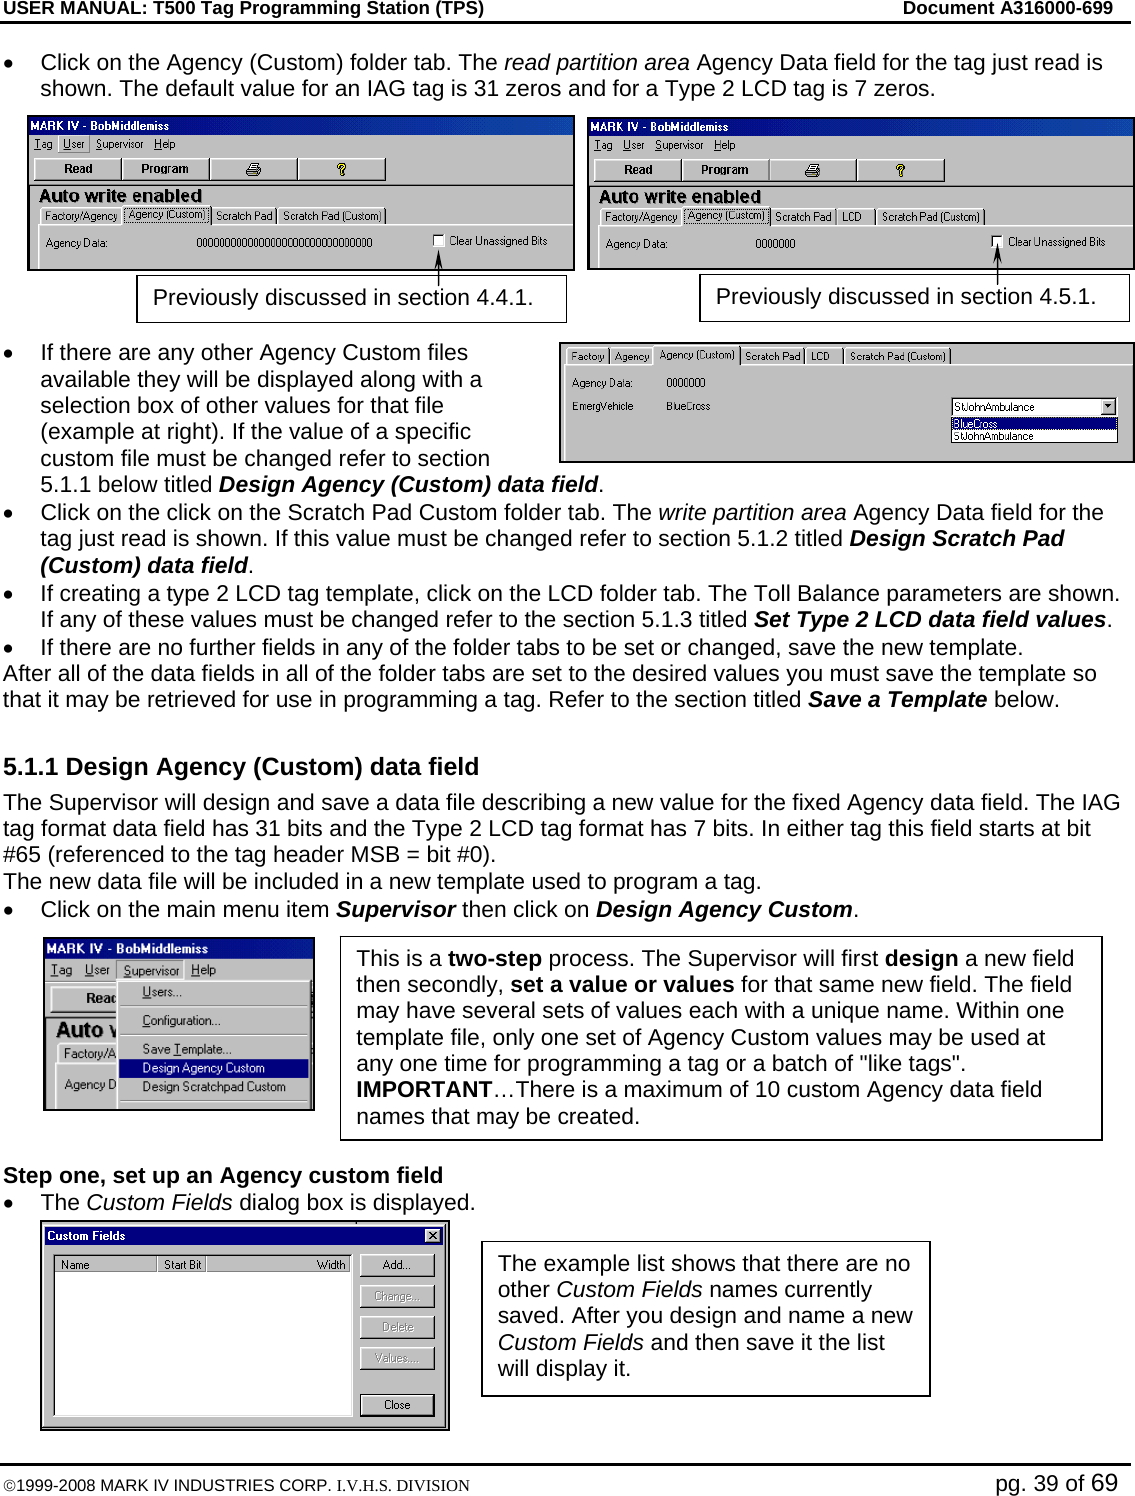 USER MANUAL: T500 Tag Programming Station (TPS)     Document A316000-699  ©1999-2008 MARK IV INDUSTRIES CORP. I.V.H.S. DIVISION   pg. 39 of 69 •  Click on the Agency (Custom) folder tab. The read partition area Agency Data field for the tag just read is shown. The default value for an IAG tag is 31 zeros and for a Type 2 LCD tag is 7 zeros.   •  If there are any other Agency Custom files available they will be displayed along with a selection box of other values for that file (example at right). If the value of a specific custom file must be changed refer to section 5.1.1 below titled Design Agency (Custom) data field. •  Click on the click on the Scratch Pad Custom folder tab. The write partition area Agency Data field for the tag just read is shown. If this value must be changed refer to section 5.1.2 titled Design Scratch Pad (Custom) data field.  •  If creating a type 2 LCD tag template, click on the LCD folder tab. The Toll Balance parameters are shown. If any of these values must be changed refer to the section 5.1.3 titled Set Type 2 LCD data field values. •  If there are no further fields in any of the folder tabs to be set or changed, save the new template. After all of the data fields in all of the folder tabs are set to the desired values you must save the template so that it may be retrieved for use in programming a tag. Refer to the section titled Save a Template below.  5.1.1 Design Agency (Custom) data field The Supervisor will design and save a data file describing a new value for the fixed Agency data field. The IAG tag format data field has 31 bits and the Type 2 LCD tag format has 7 bits. In either tag this field starts at bit #65 (referenced to the tag header MSB = bit #0). The new data file will be included in a new template used to program a tag. •  Click on the main menu item Supervisor then click on Design Agency Custom.   Step one, set up an Agency custom field • The Custom Fields dialog box is displayed. The example list shows that there are no other Custom Fields names currently saved. After you design and name a new Custom Fields and then save it the list will display it.  This is a two-step process. The Supervisor will first design a new field then secondly, set a value or values for that same new field. The field may have several sets of values each with a unique name. Within one template file, only one set of Agency Custom values may be used at any one time for programming a tag or a batch of &quot;like tags&quot;.  IMPORTANT…There is a maximum of 10 custom Agency data field names that may be created. Previously discussed in section 4.4.1.  Previously discussed in section 4.5.1. 